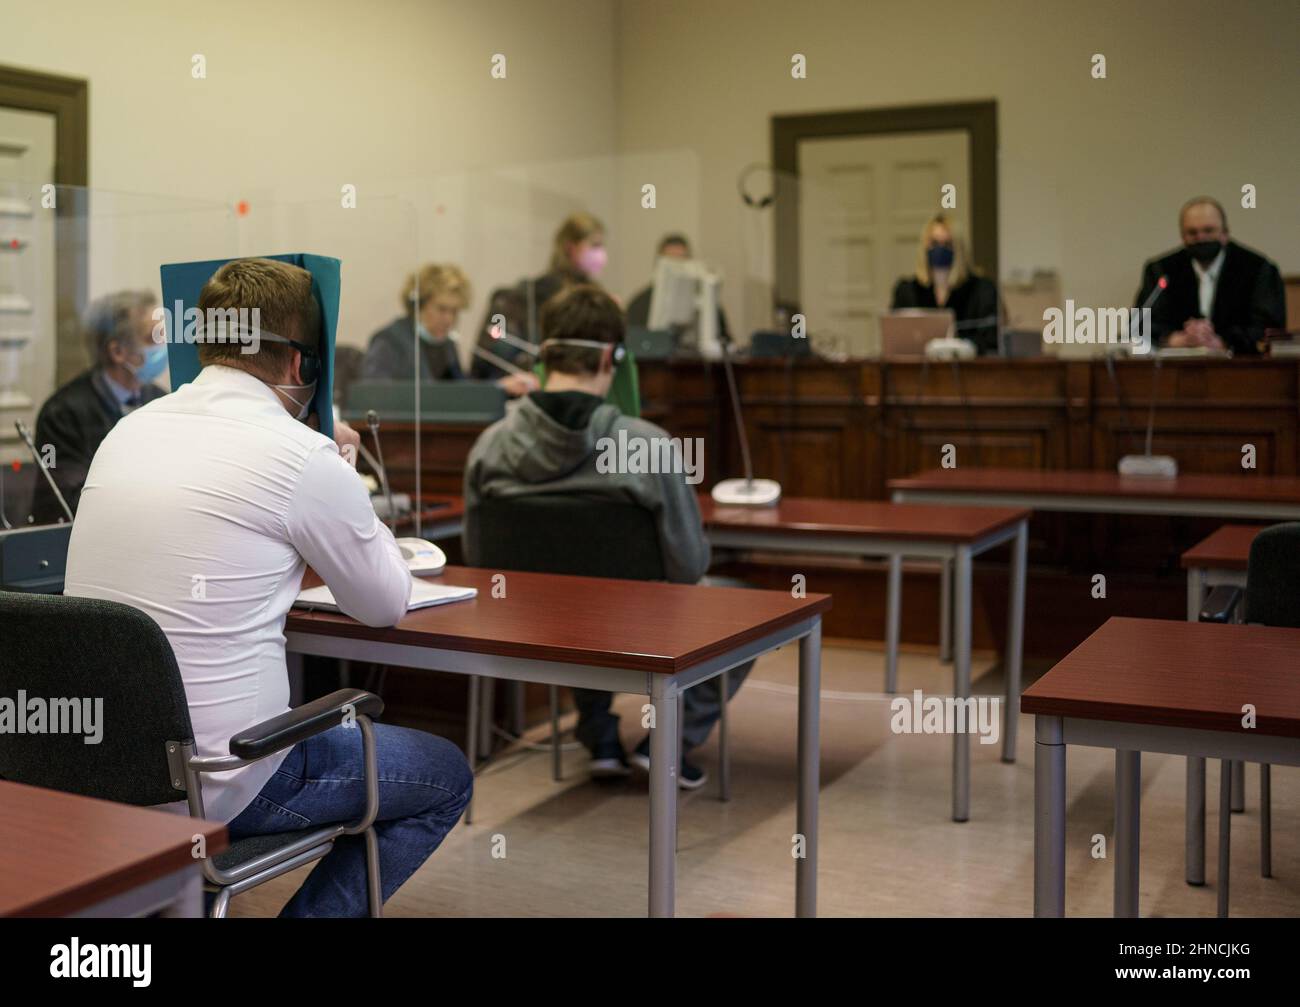 Hamburg, Germany. 16th Feb, 2022. The two 35-year-old defendants (2nd from left and 4th from left) in the trial for attempted murder wait for the trial to begin in a hall at Hamburg Regional Court. The main defendant, together with the alleged accomplice, is alleged to have kicked, beaten and thrown pieces of furniture at the victim in a fitter's apartment in August 2021 in order to act out violent fantasies. Credit: Axel Heimken/dpa/Alamy Live News Stock Photo